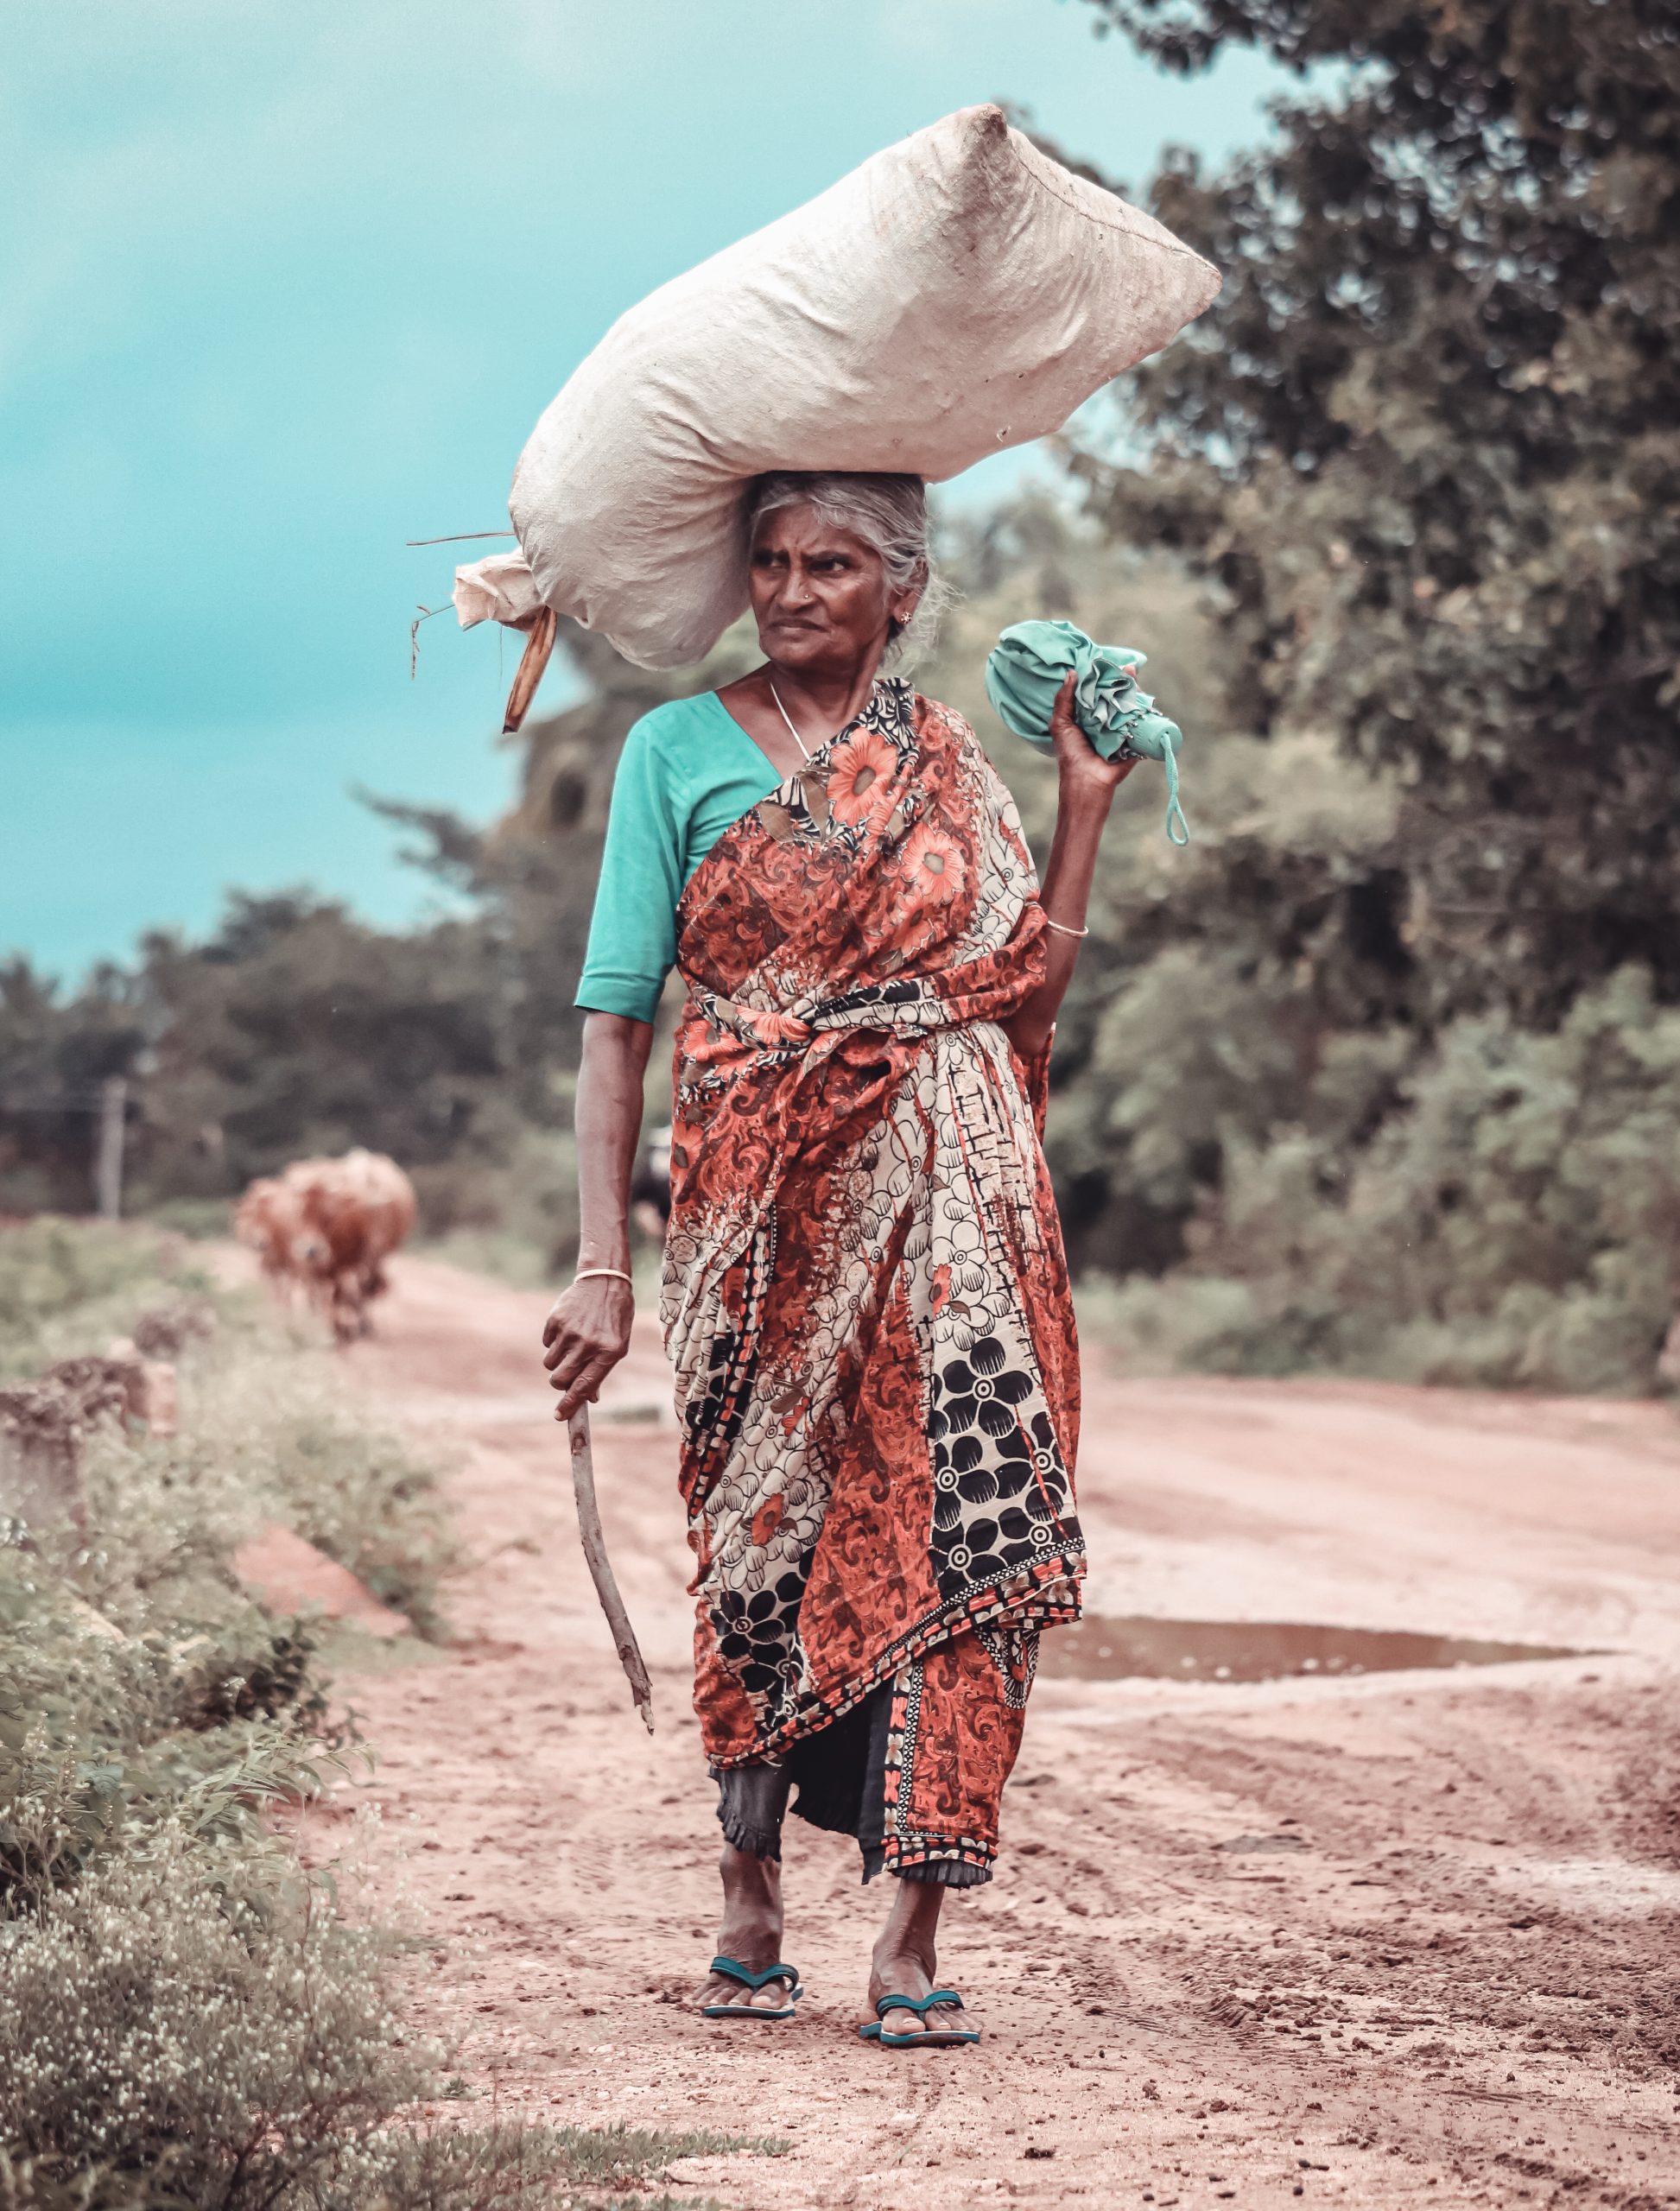 A village woman carrying a sack